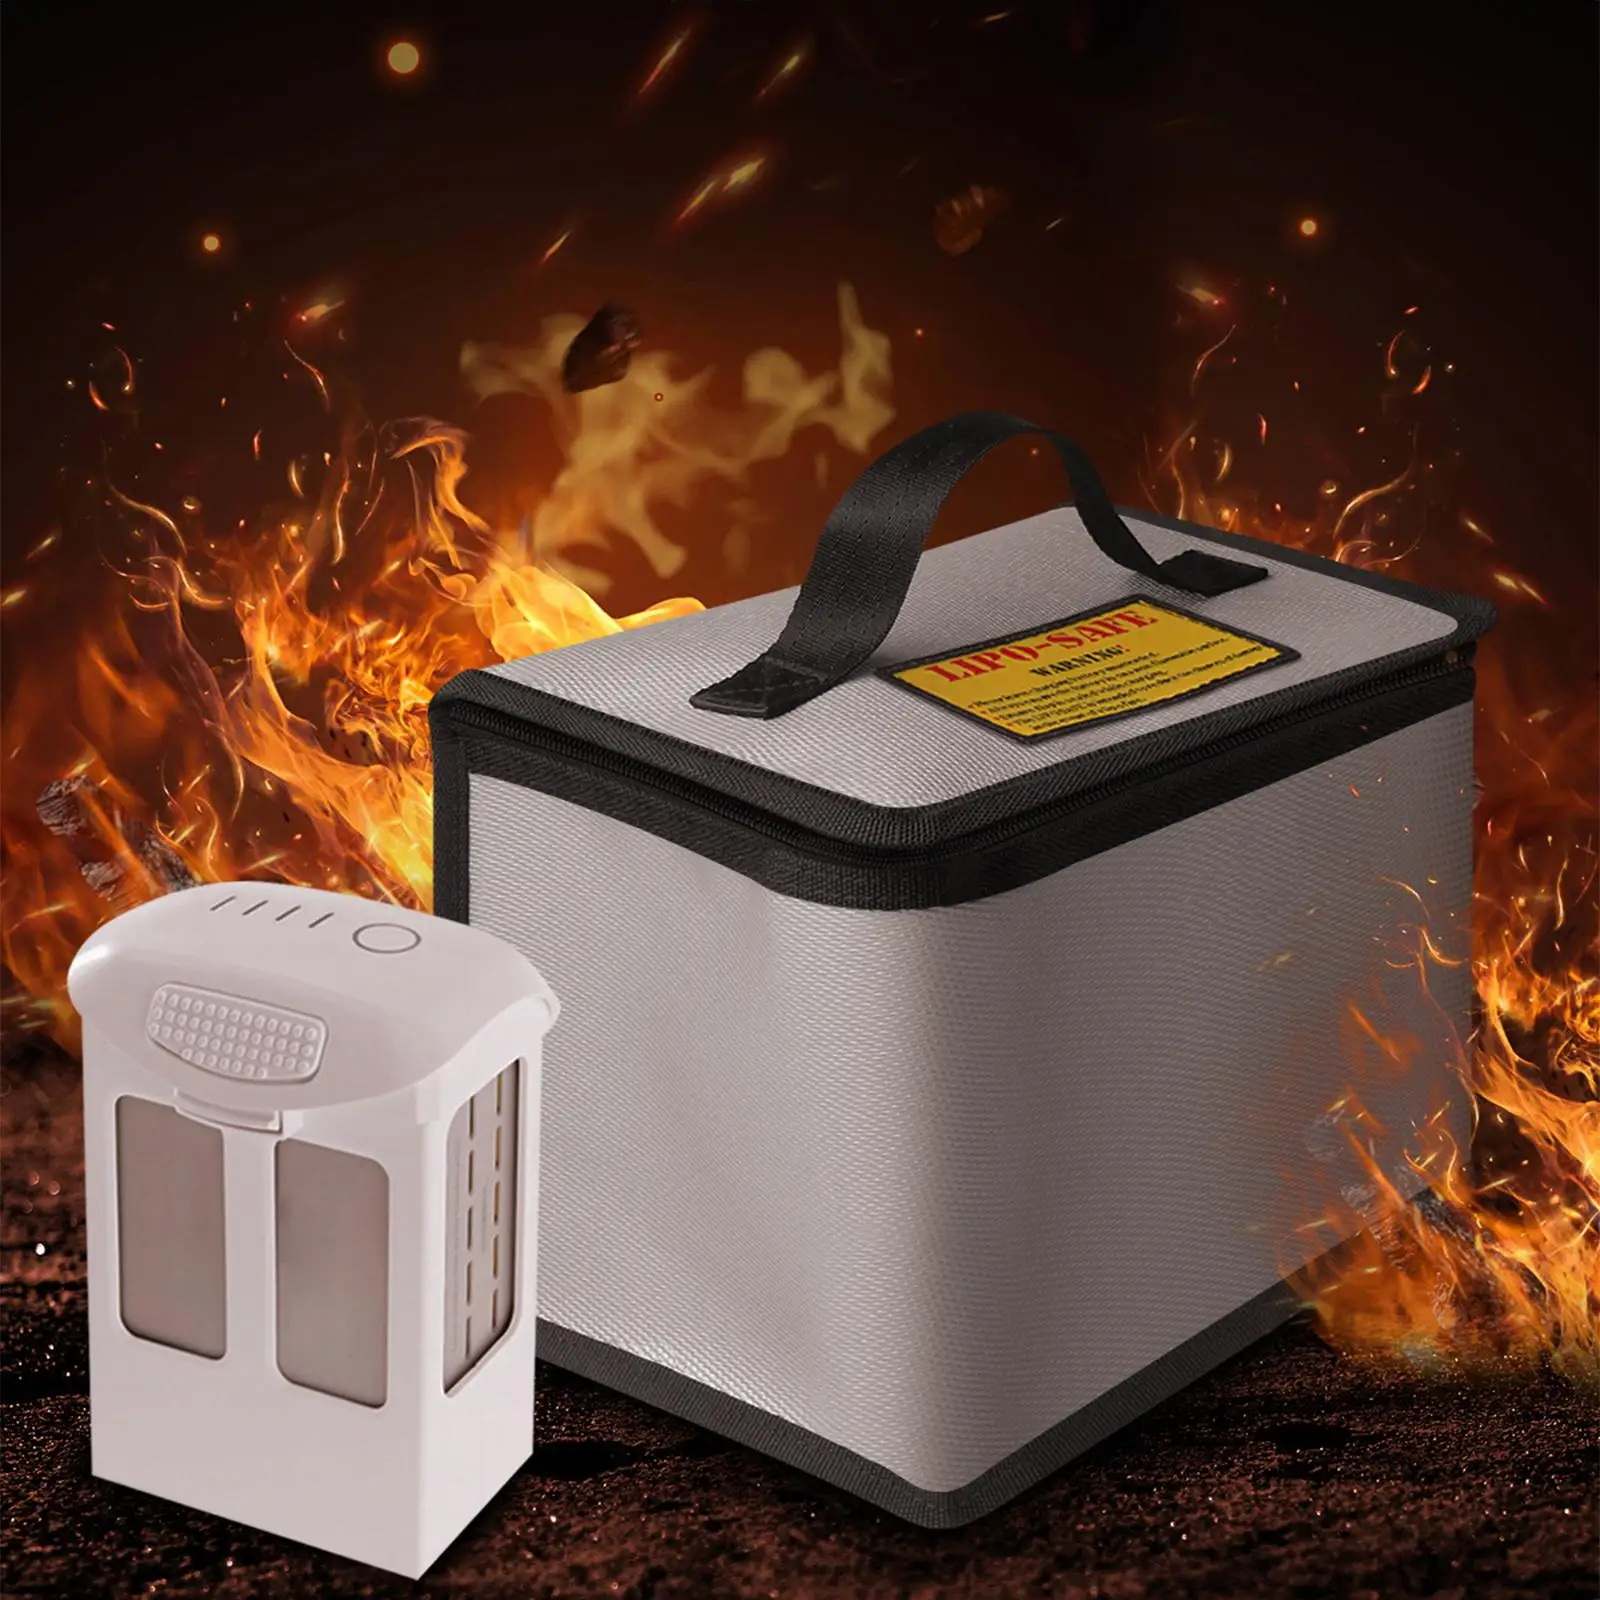 Lipo Battery Pouch Durable Guard Fireproof Explosionproof Easy Store and Carry Handheld Portable Fireproof Bag for Family Home